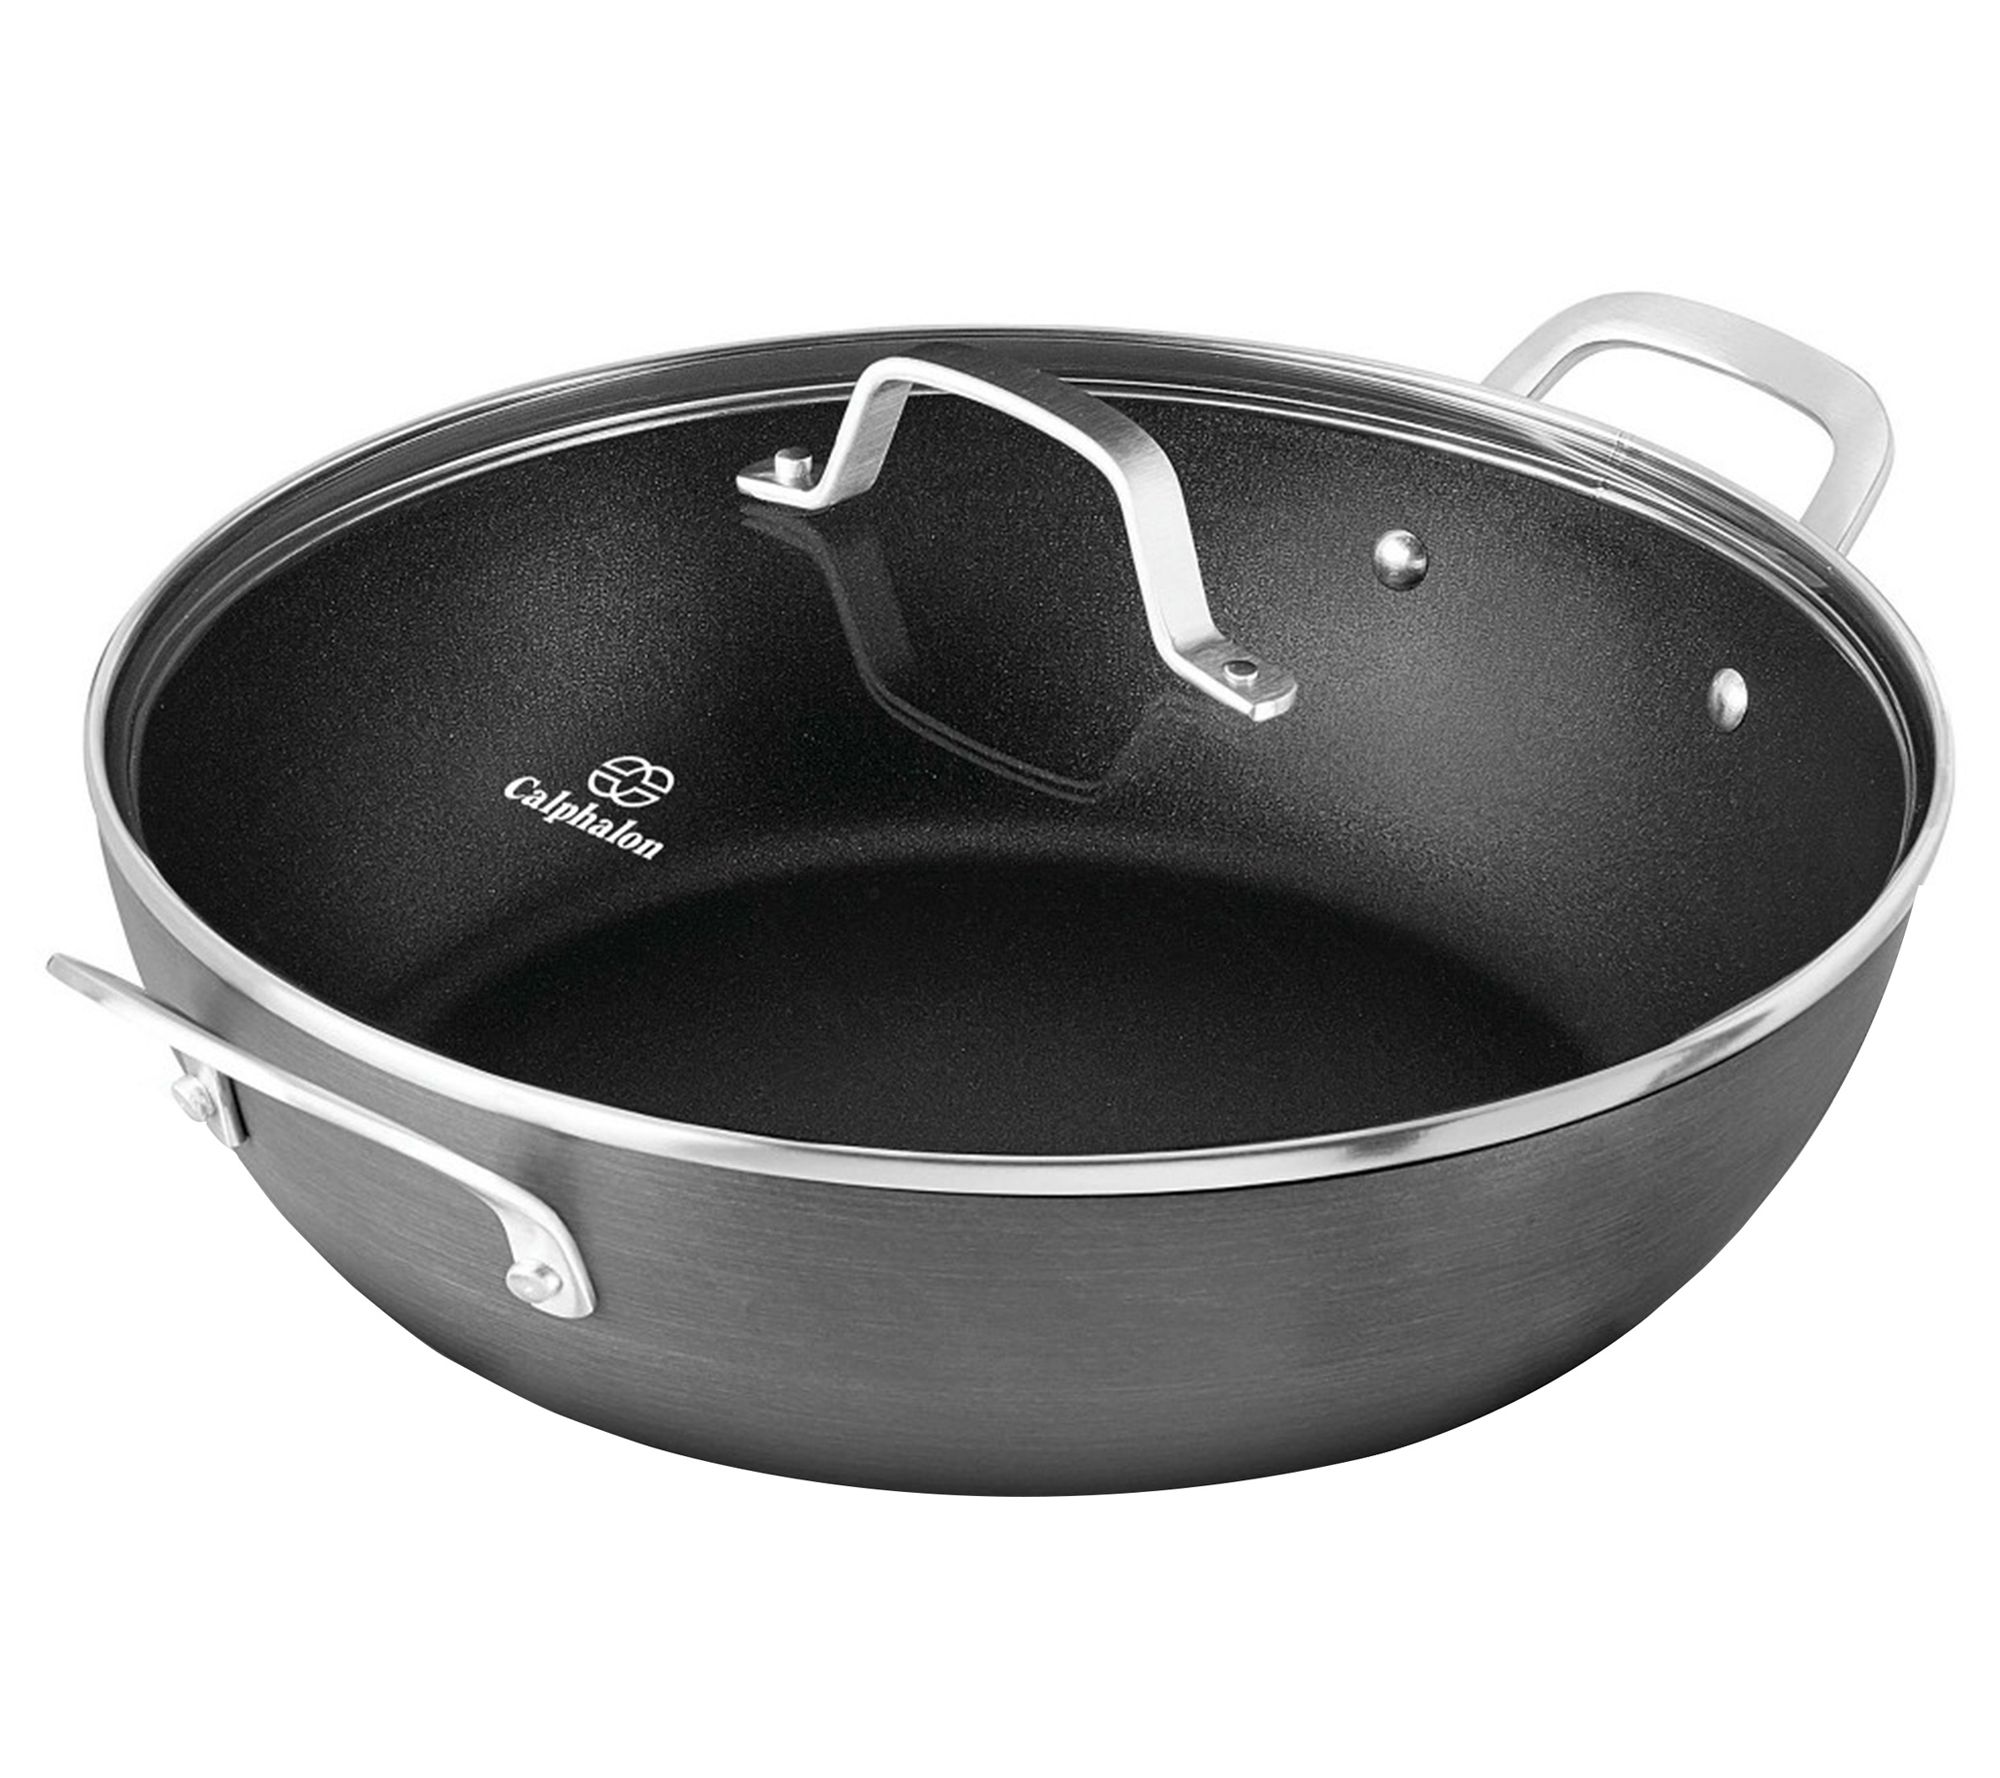 Any thoughts on Calphalon? : r/castiron